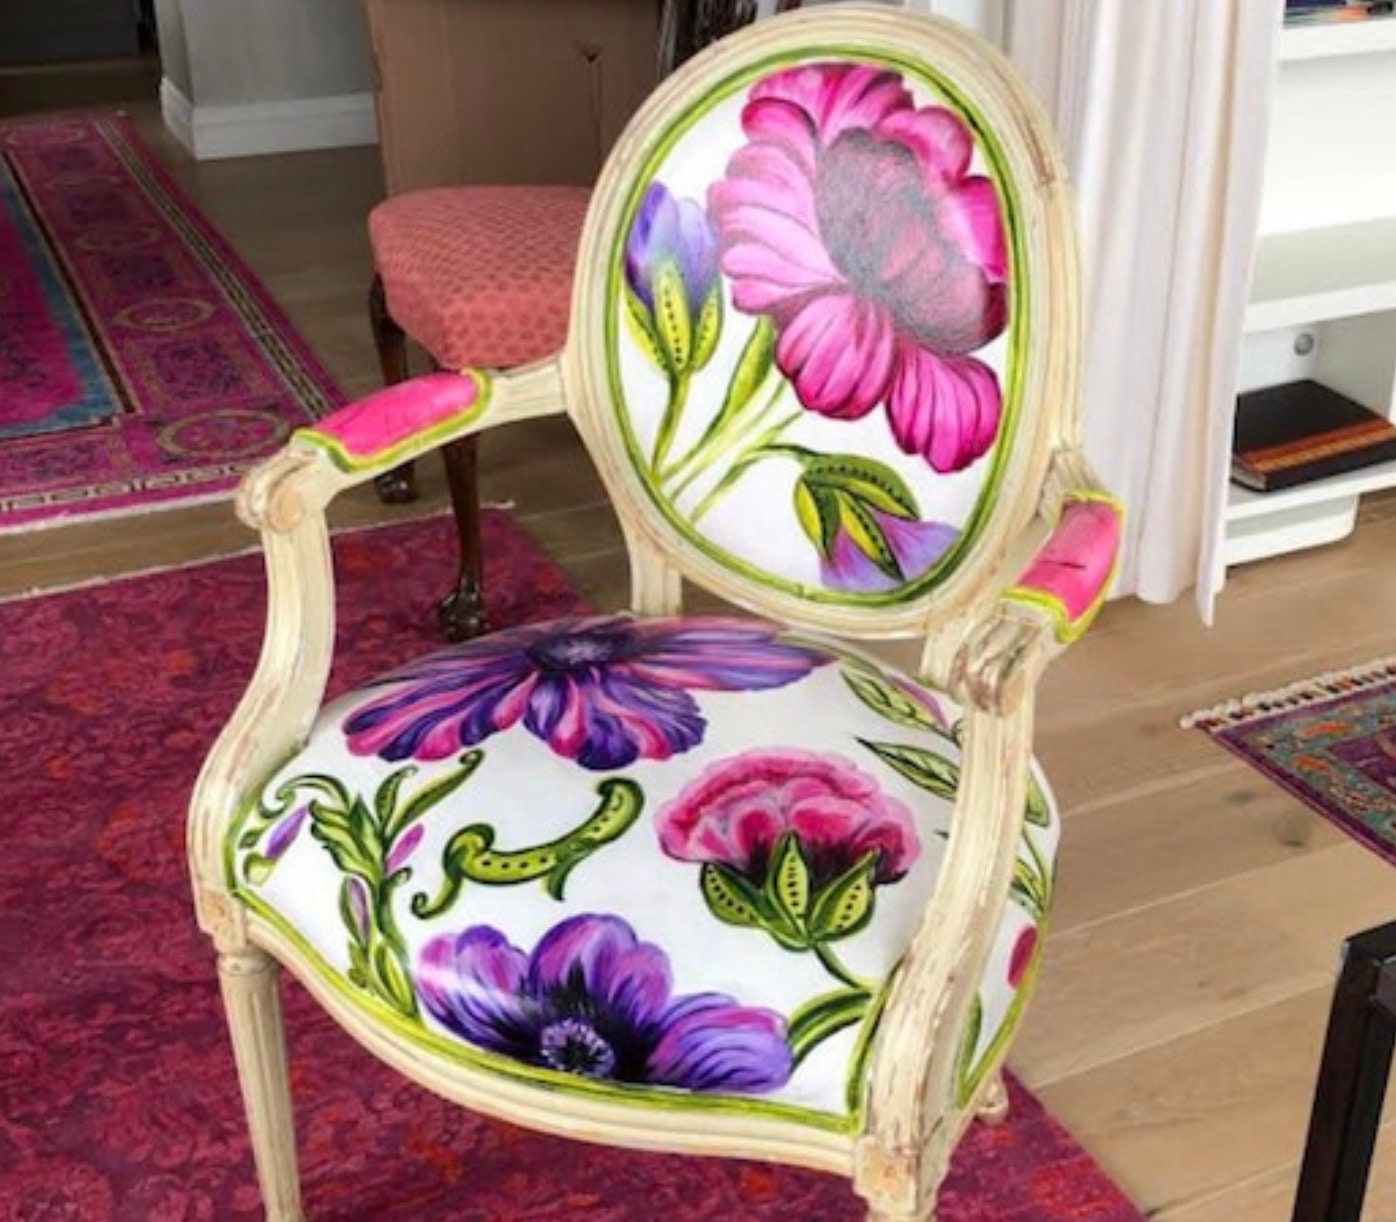 Alice & Queen Wonderland Chairs  Painting fabric chairs, Paint upholstery,  Chair